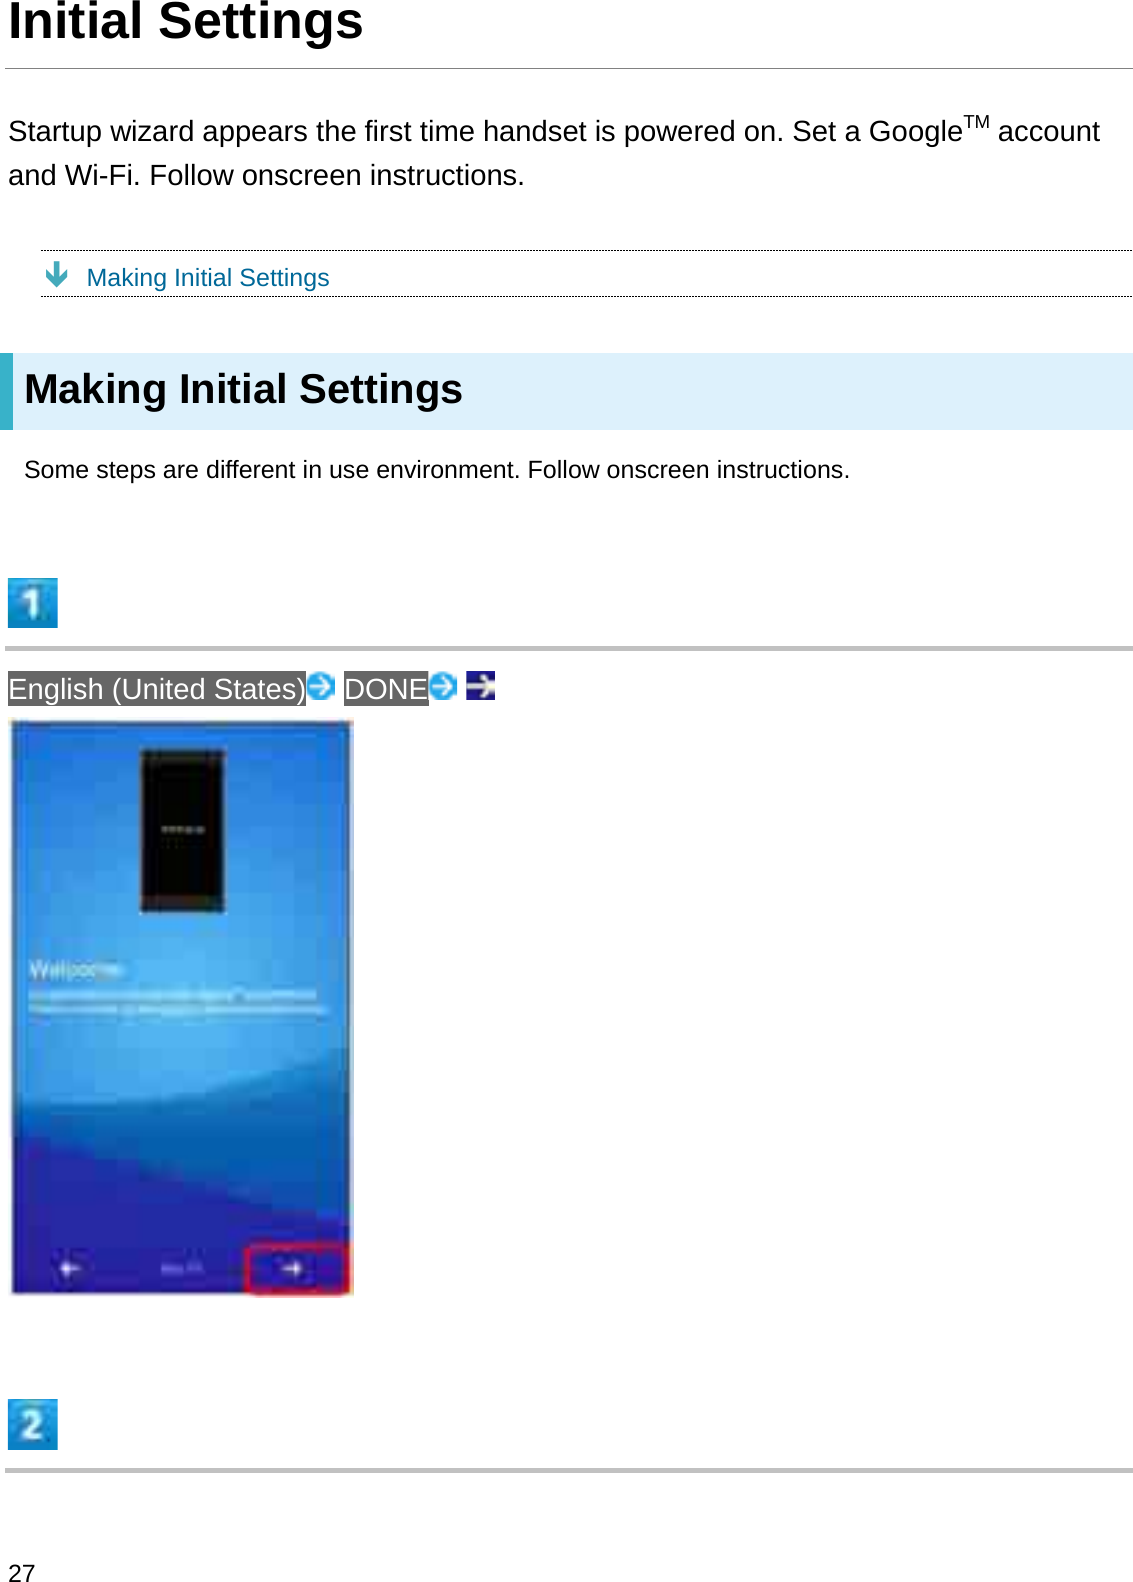 Initial SettingsStartup wizard appears the first time handset is powered on. Set a GoogleTM accountand Wi-Fi. Follow onscreen instructions.ÐMaking Initial SettingsMaking Initial SettingsSome steps are different in use environment. Follow onscreen instructions.English (United States) DONE27